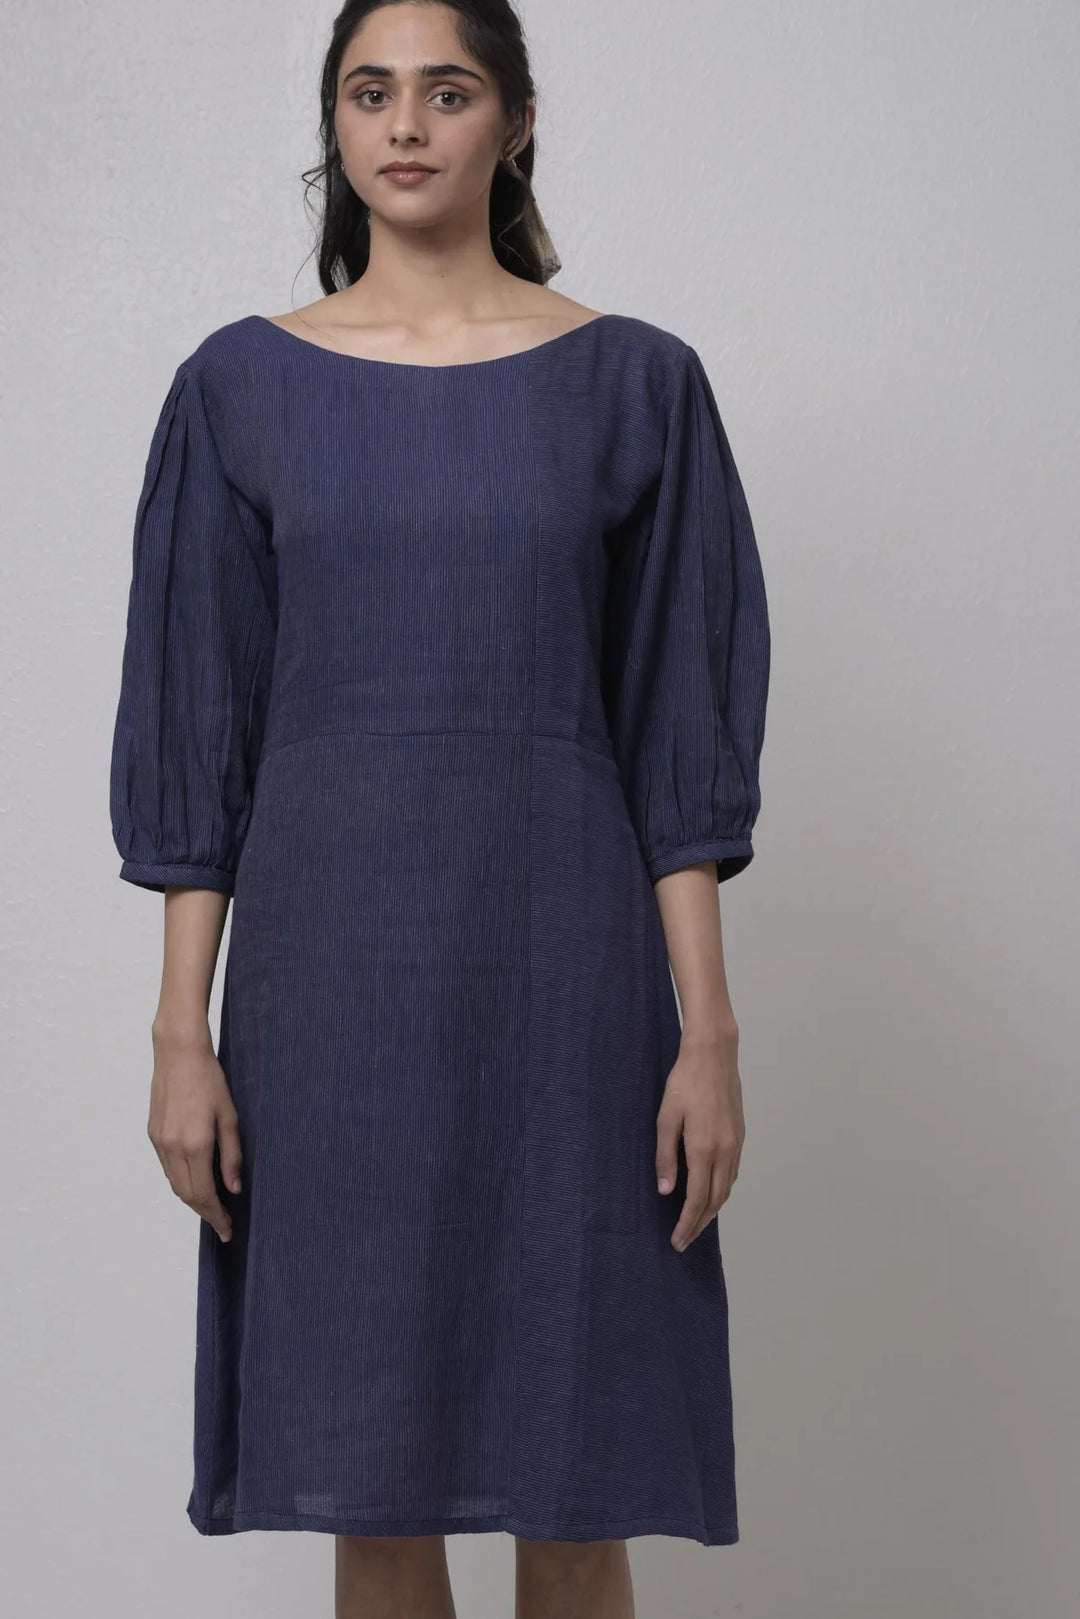 Navy Blue Boat Neck Dress with 3/4 Sleeves | Boat Neck Handwoven Dress - Navy Blue